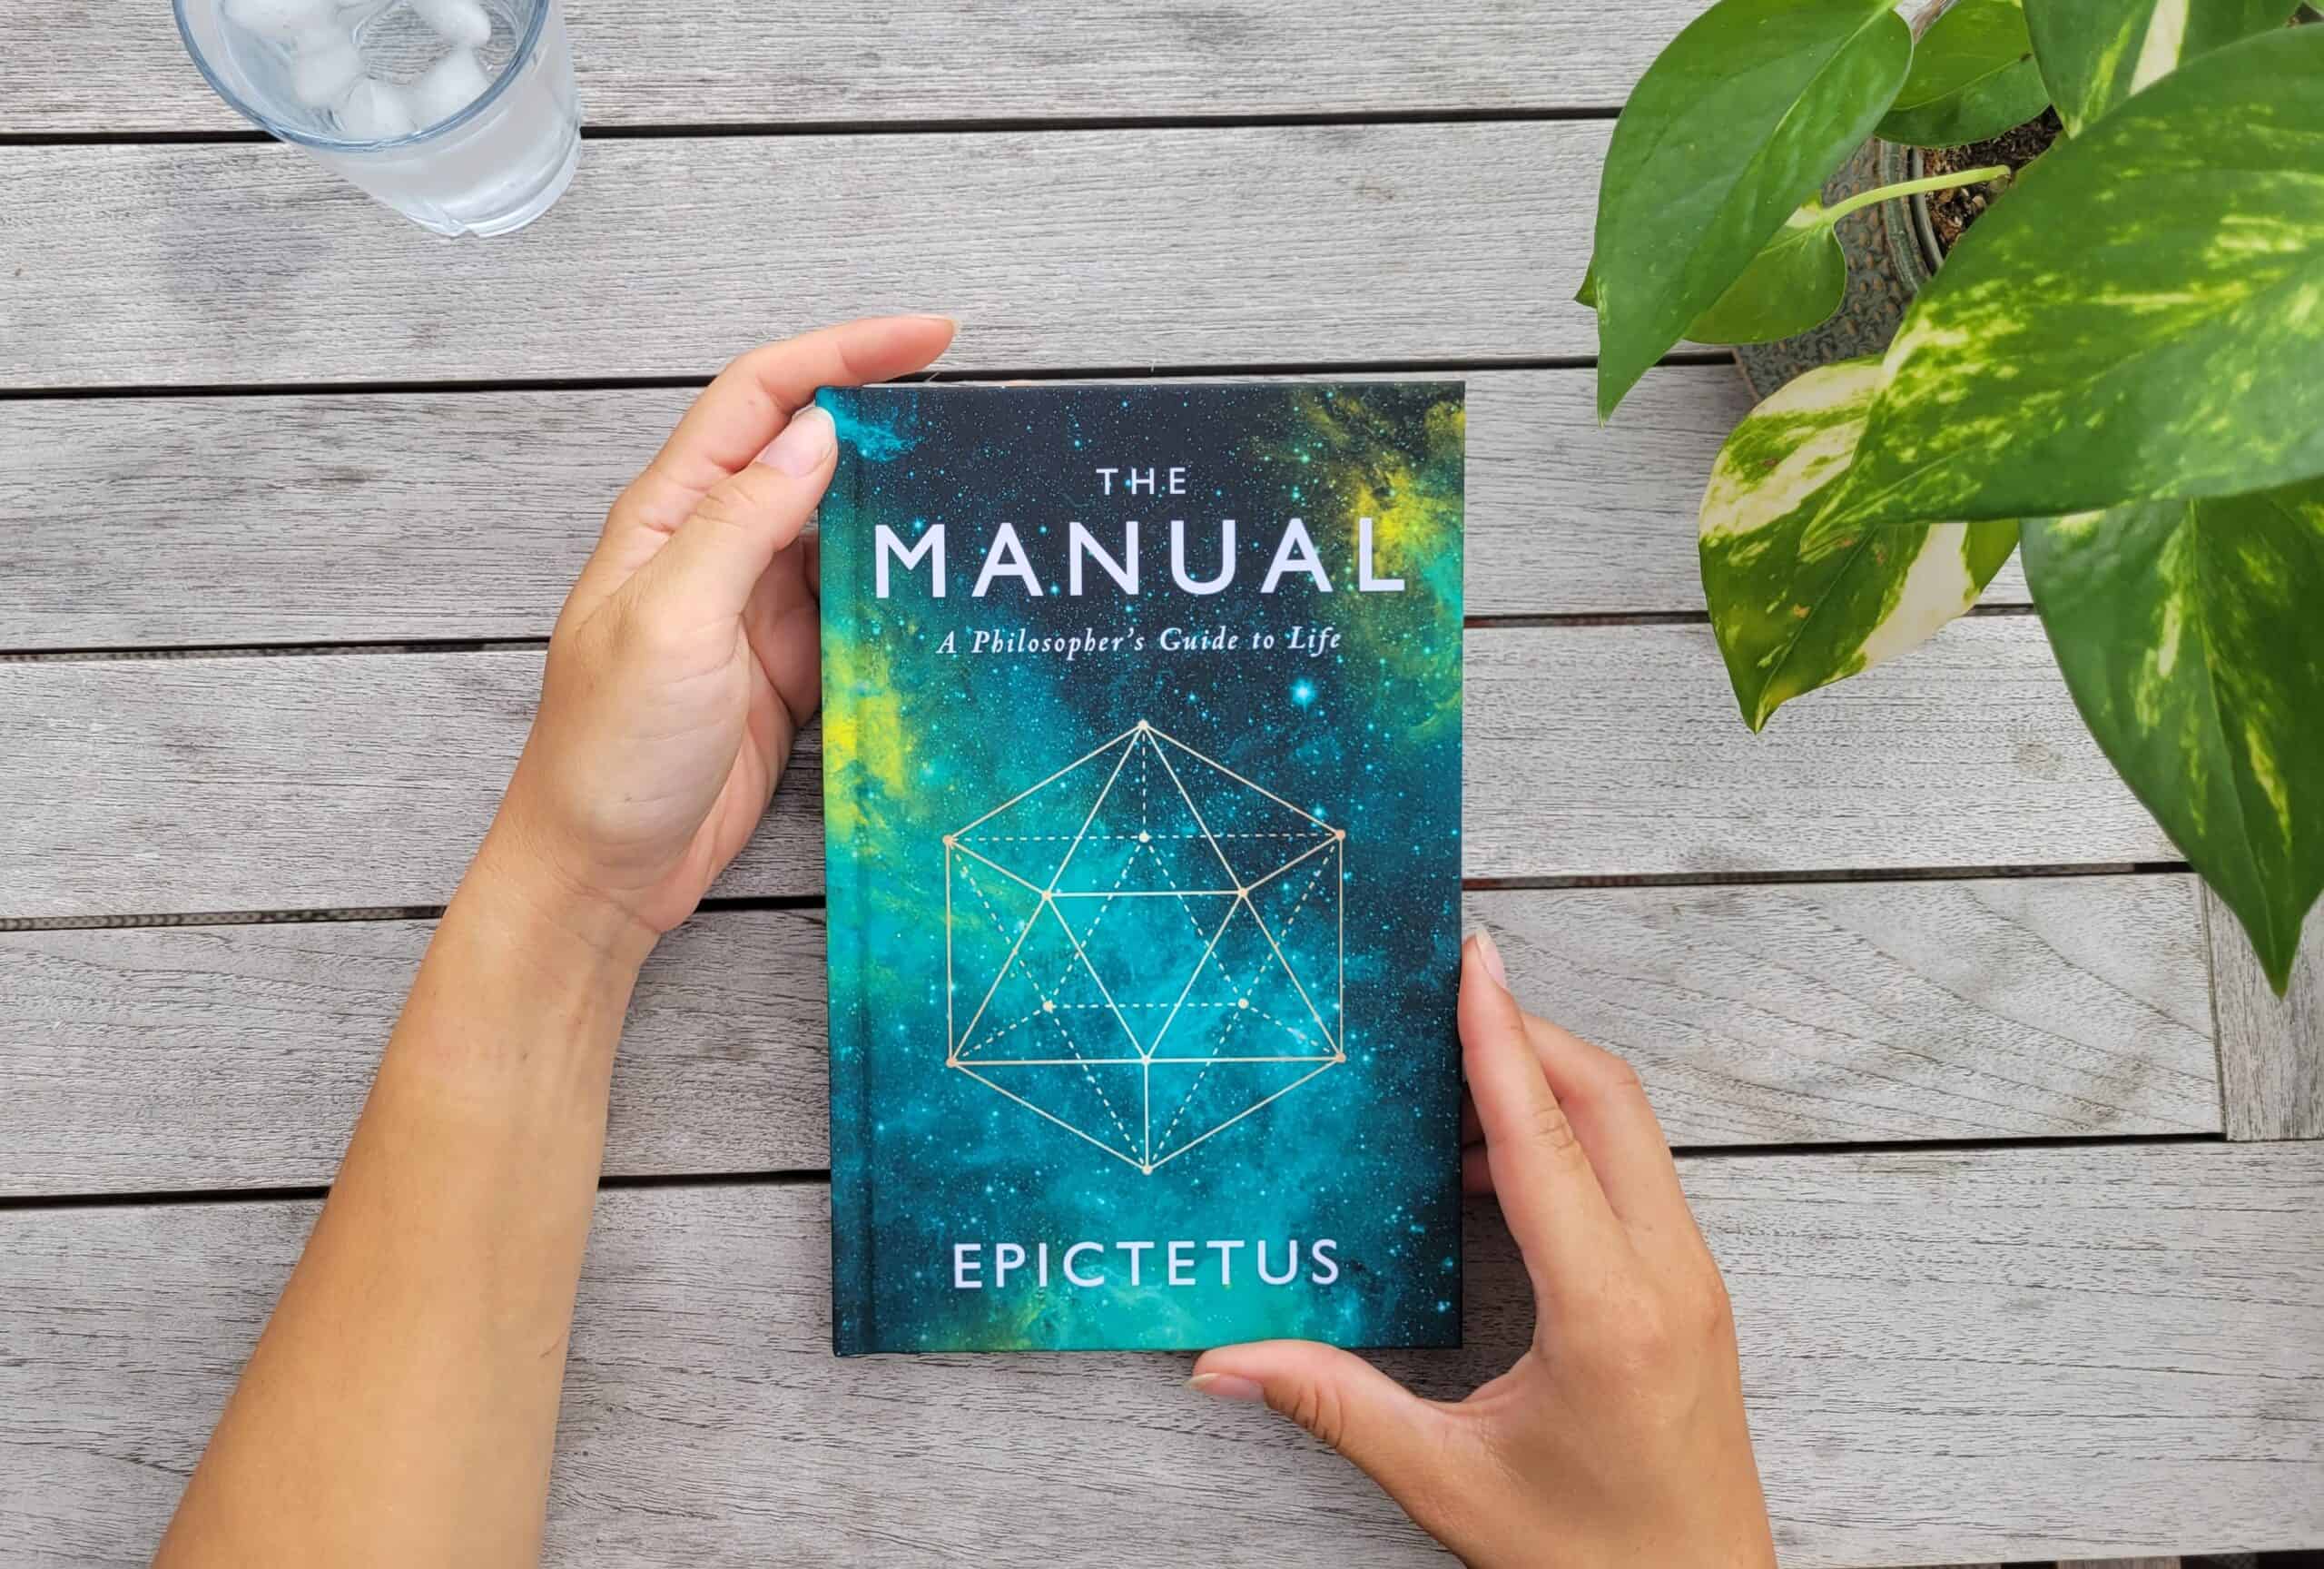 Summary: The Manual: A Philosopher’s Guide to Life by Epictetus